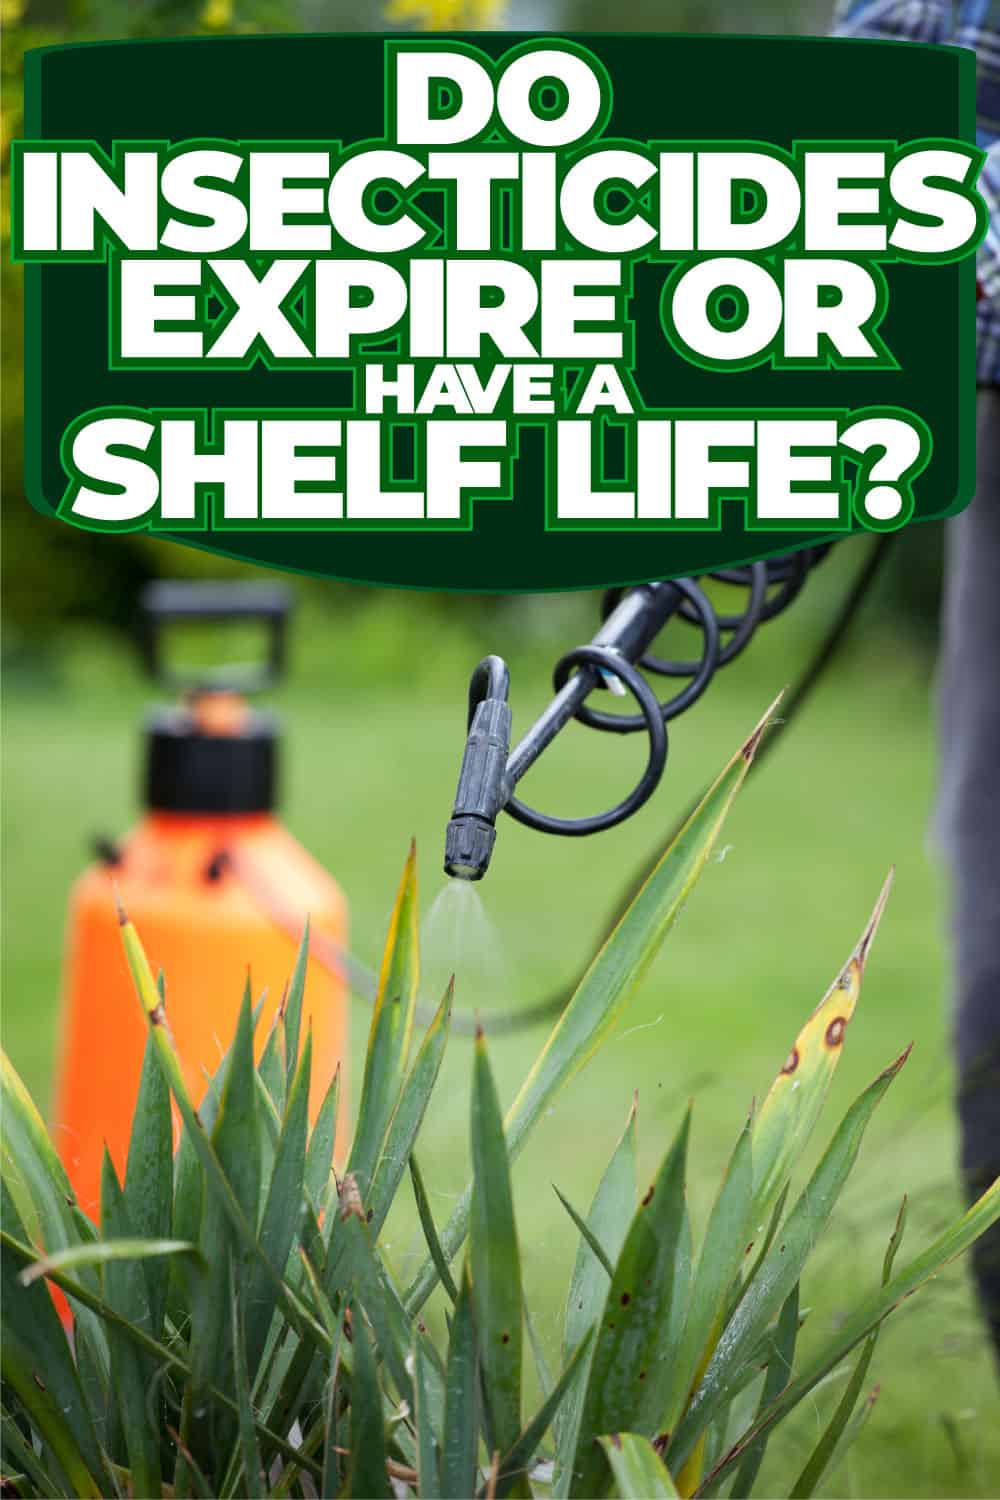 Do Insecticides Expire Or Have A Shelf Life